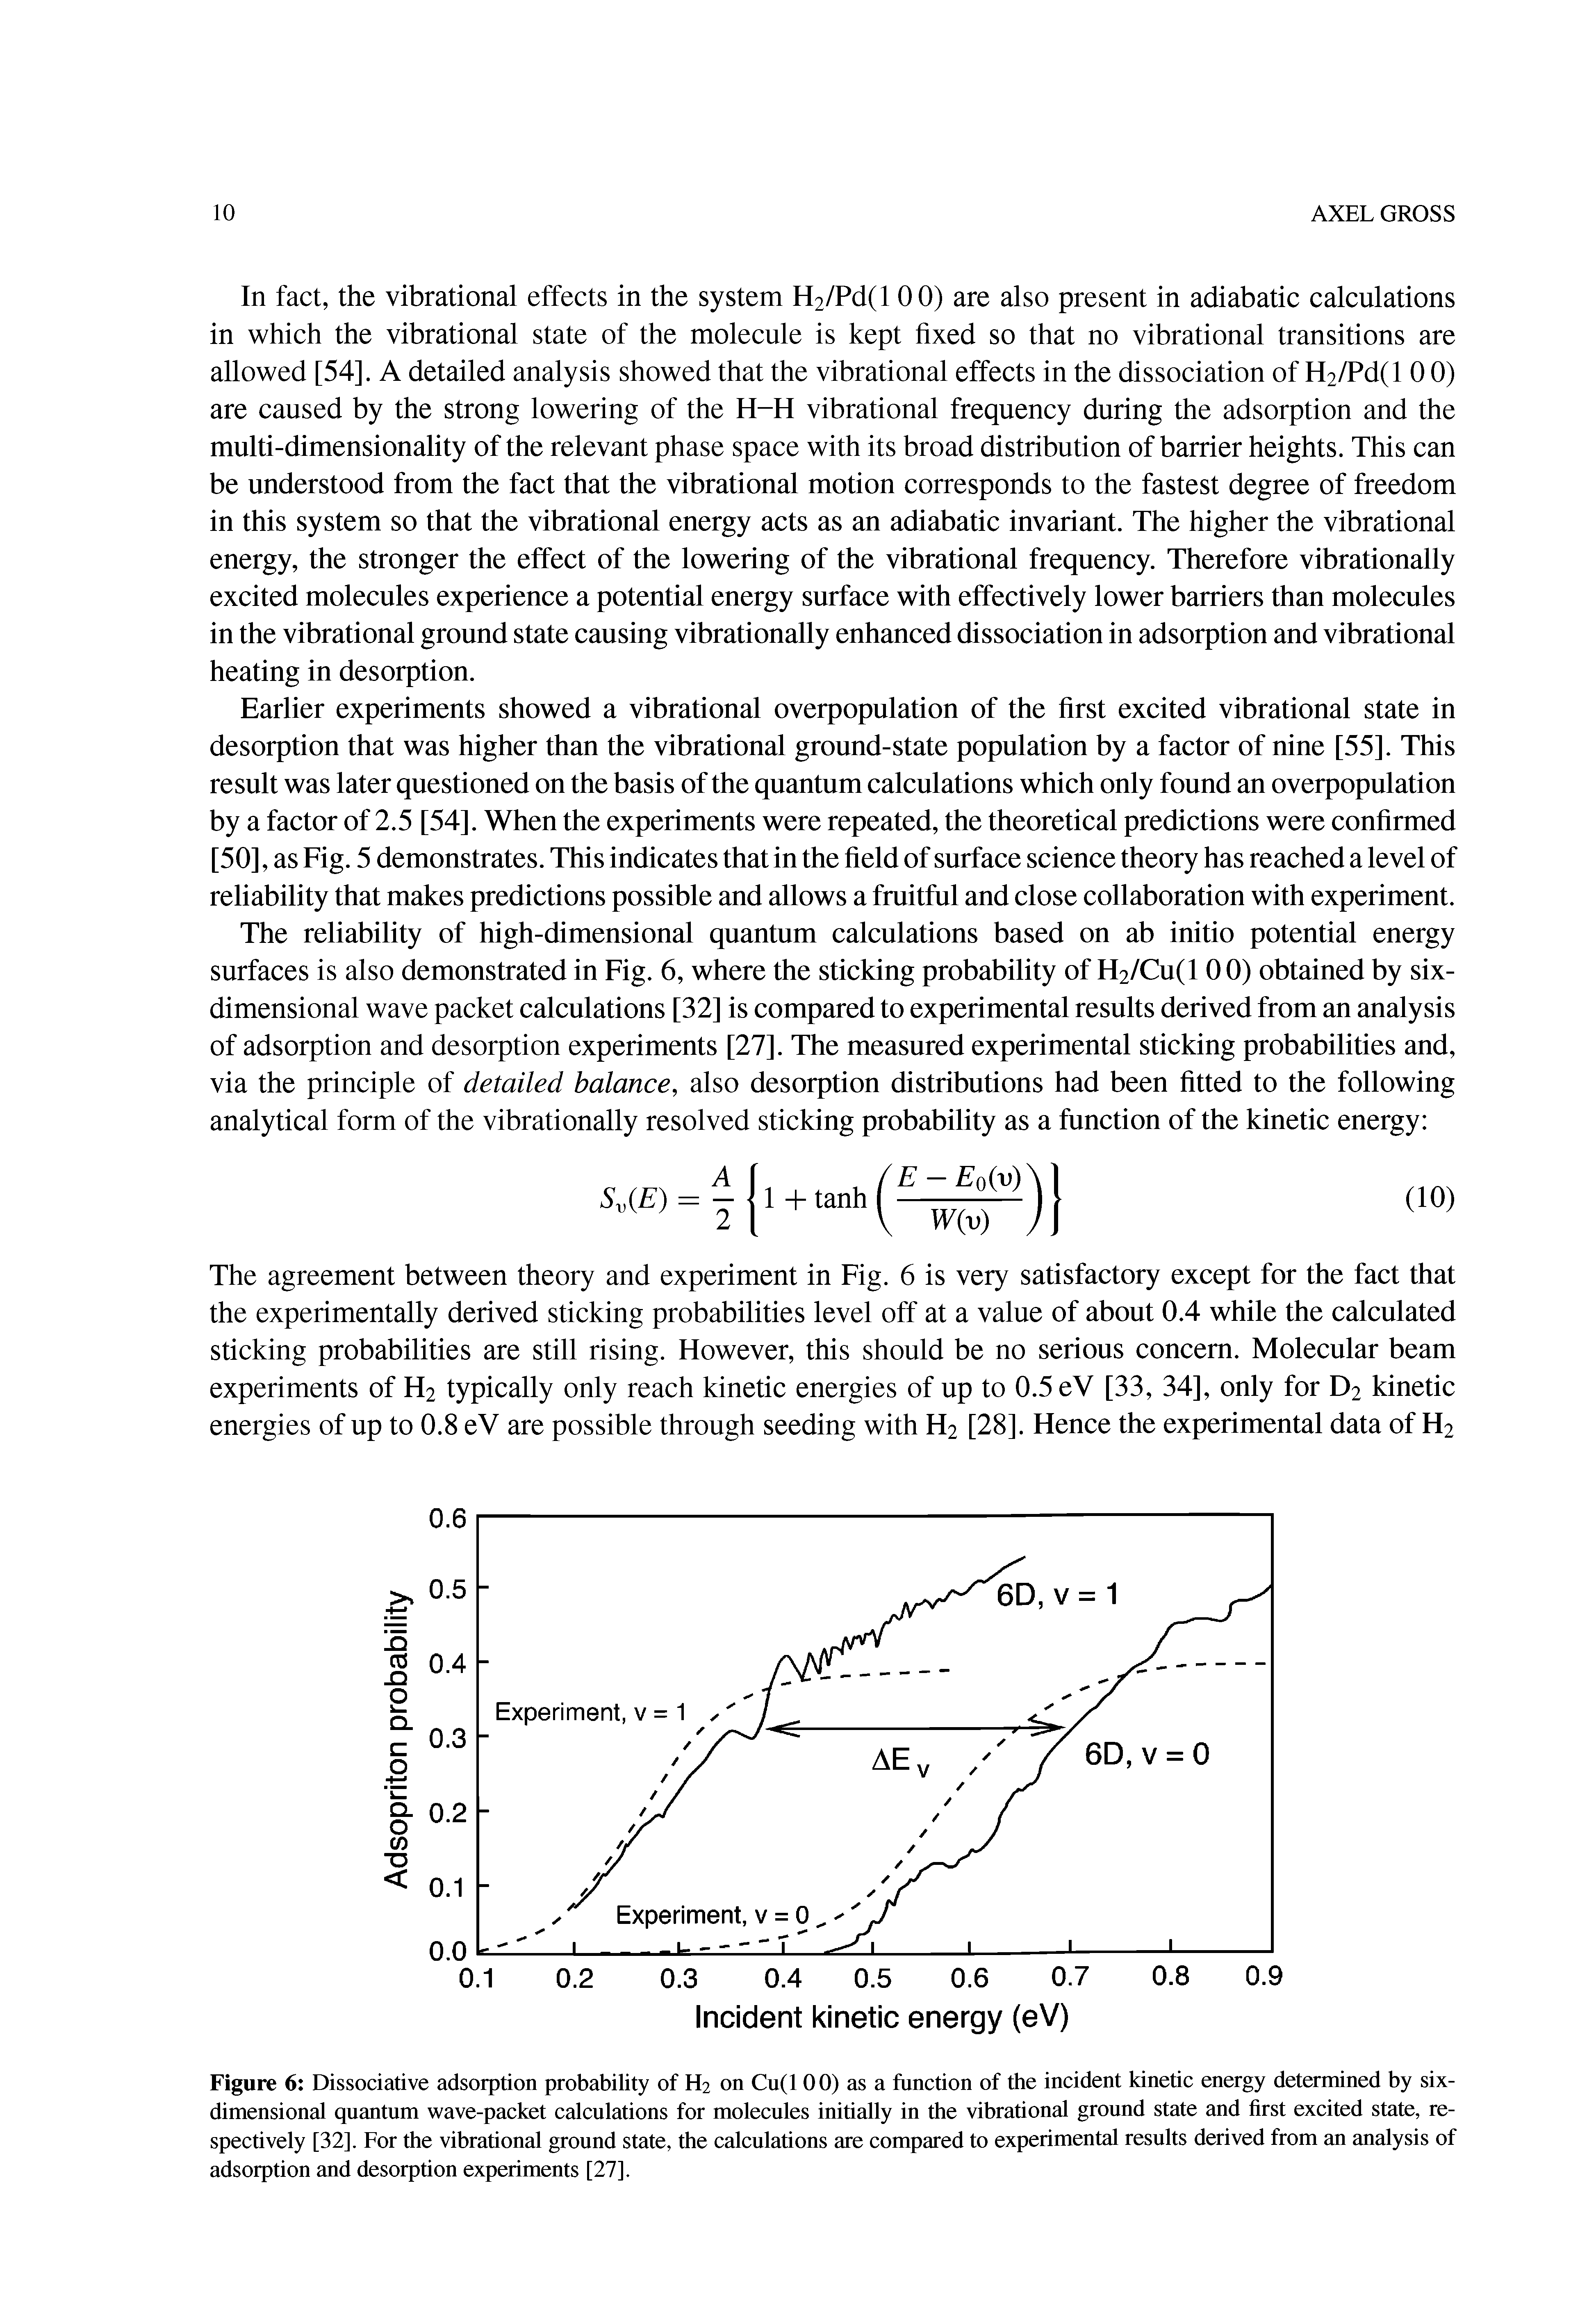 Figure 6 Dissociative adsorption probability of H2 on Cu(l 00) as a function of the incident kinetic energy determined by six-dimensional quantum wave-packet calculations for molecules initially in the vibrational ground state and first excited state, respectively [32], For the vibrational ground state, the calculations are compared to experimental results derived from an analysis of adsorption and desorption experiments [27].